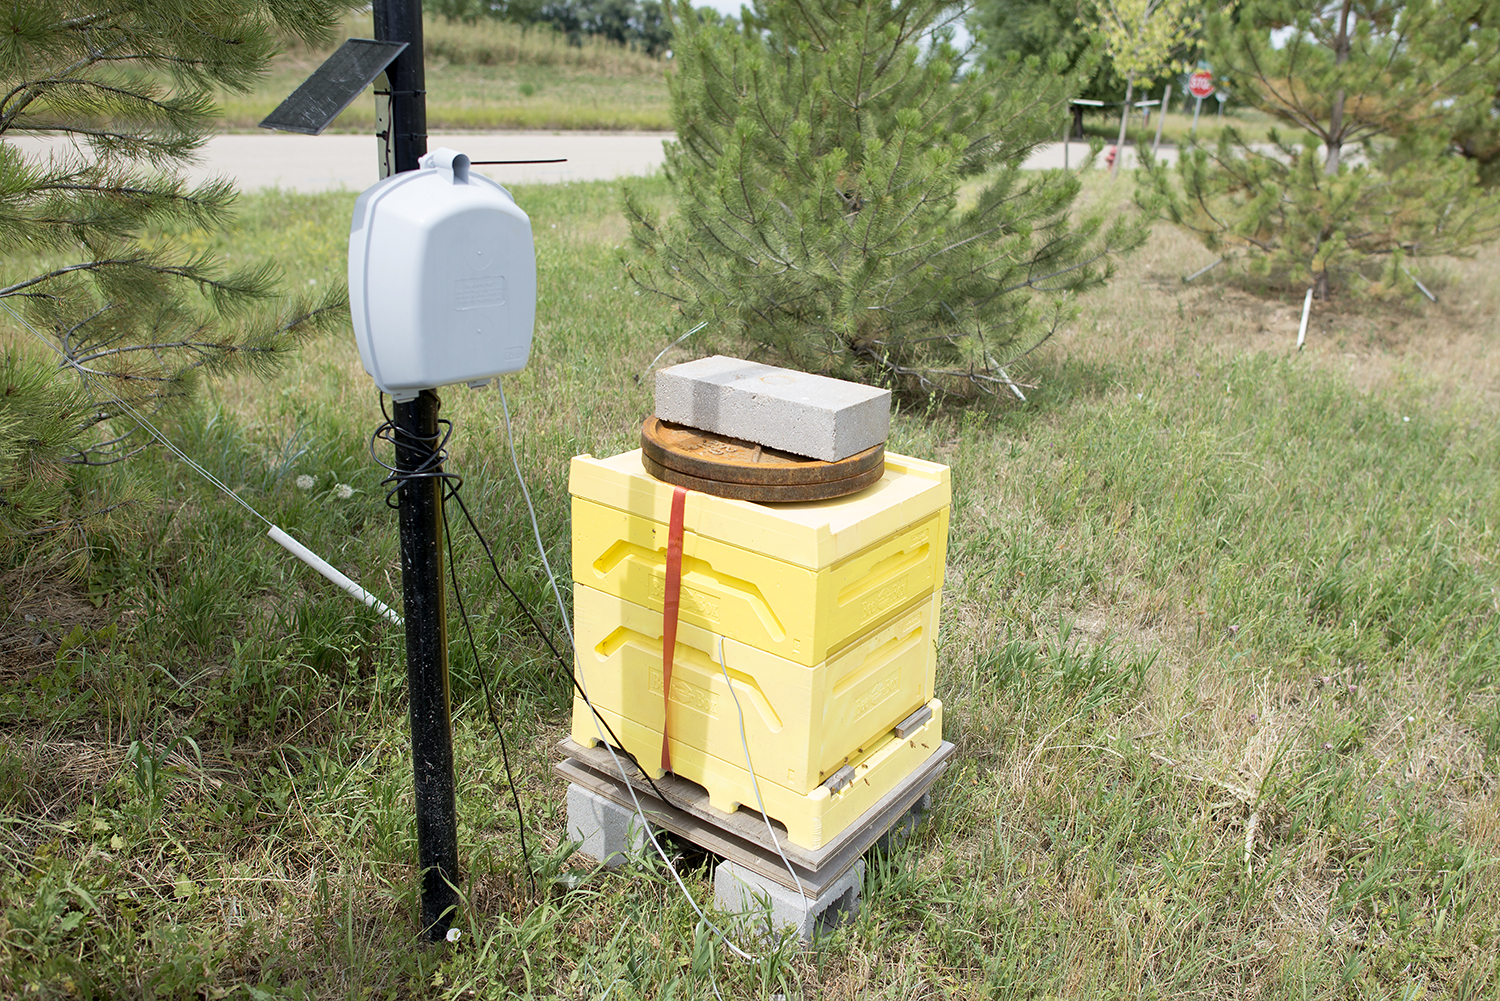 The Internet of Bees: Adding Sensors to Monitor Hive Health